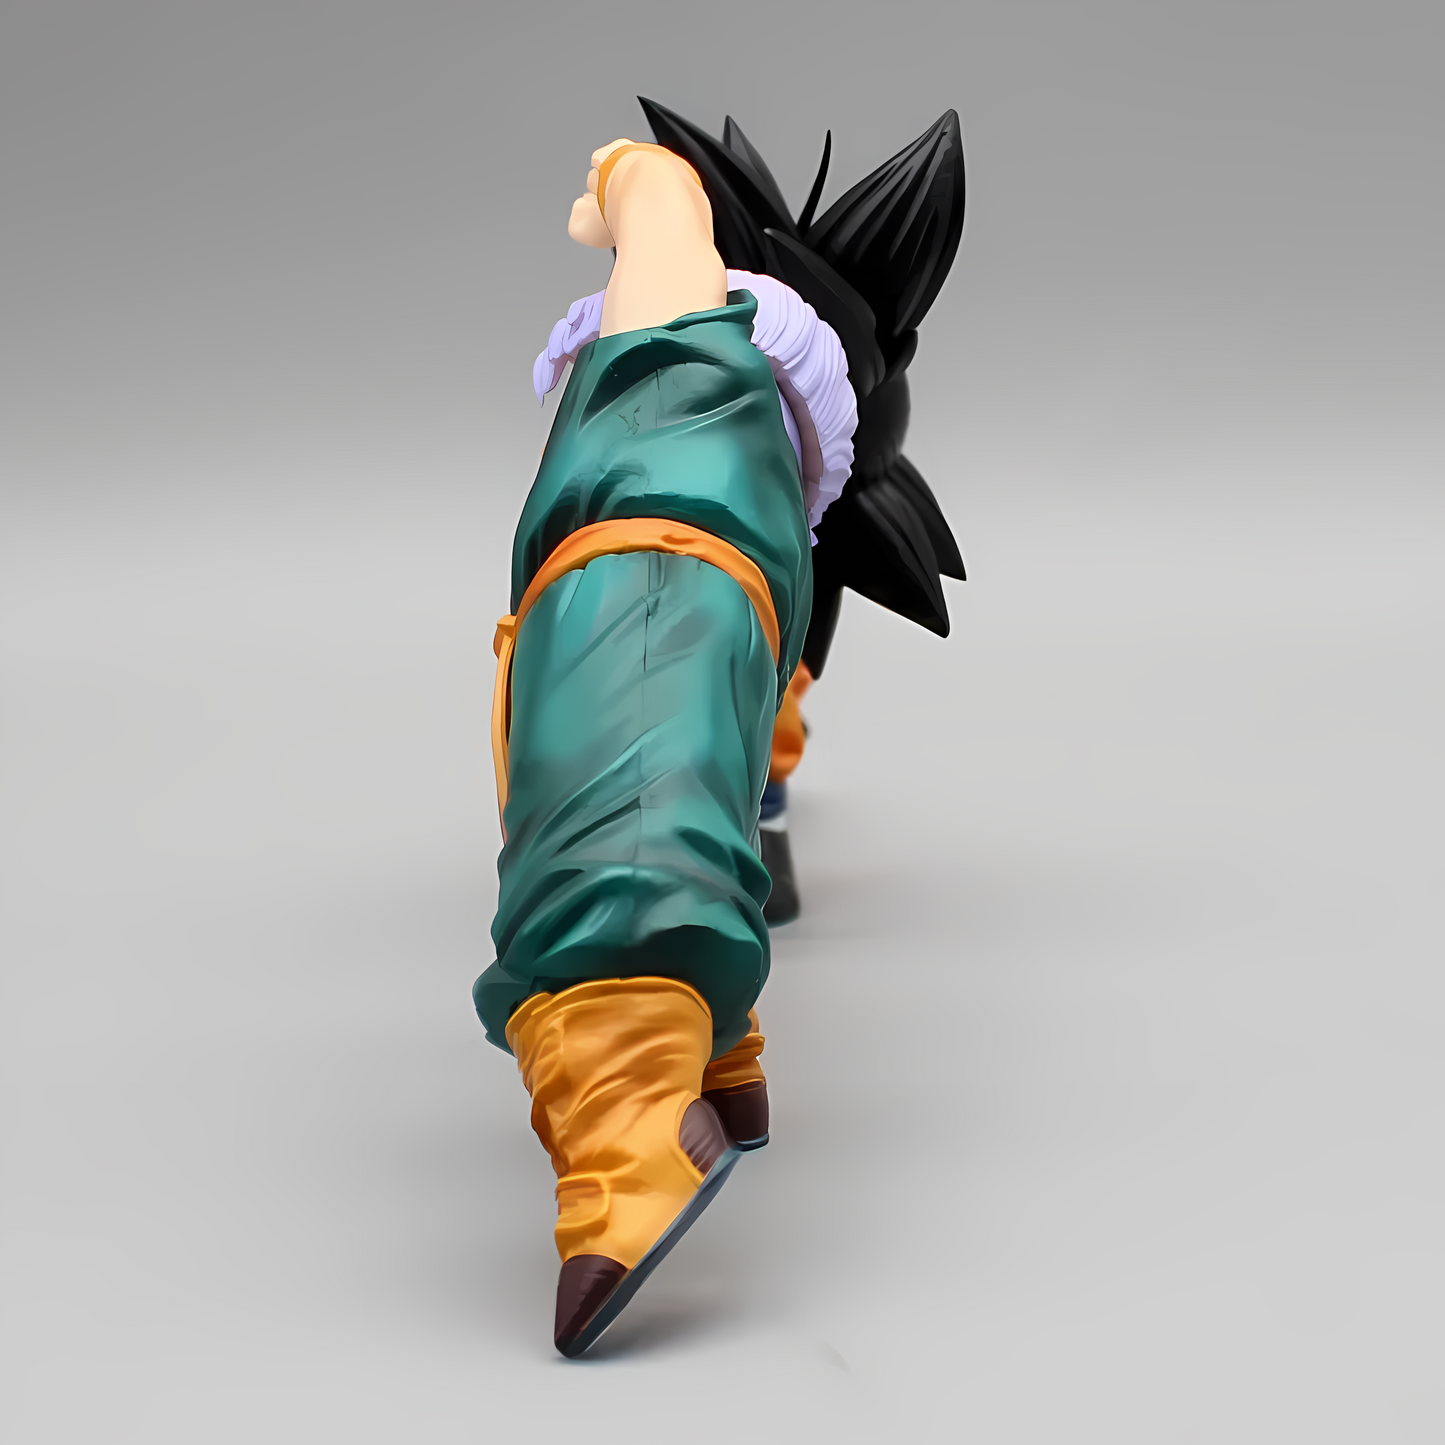 Synchronized Goten and Trunks figures captured in a static moment of the fusion dance on a neutral backdrop, showcasing the figures' detailed design and the characters' concentration.